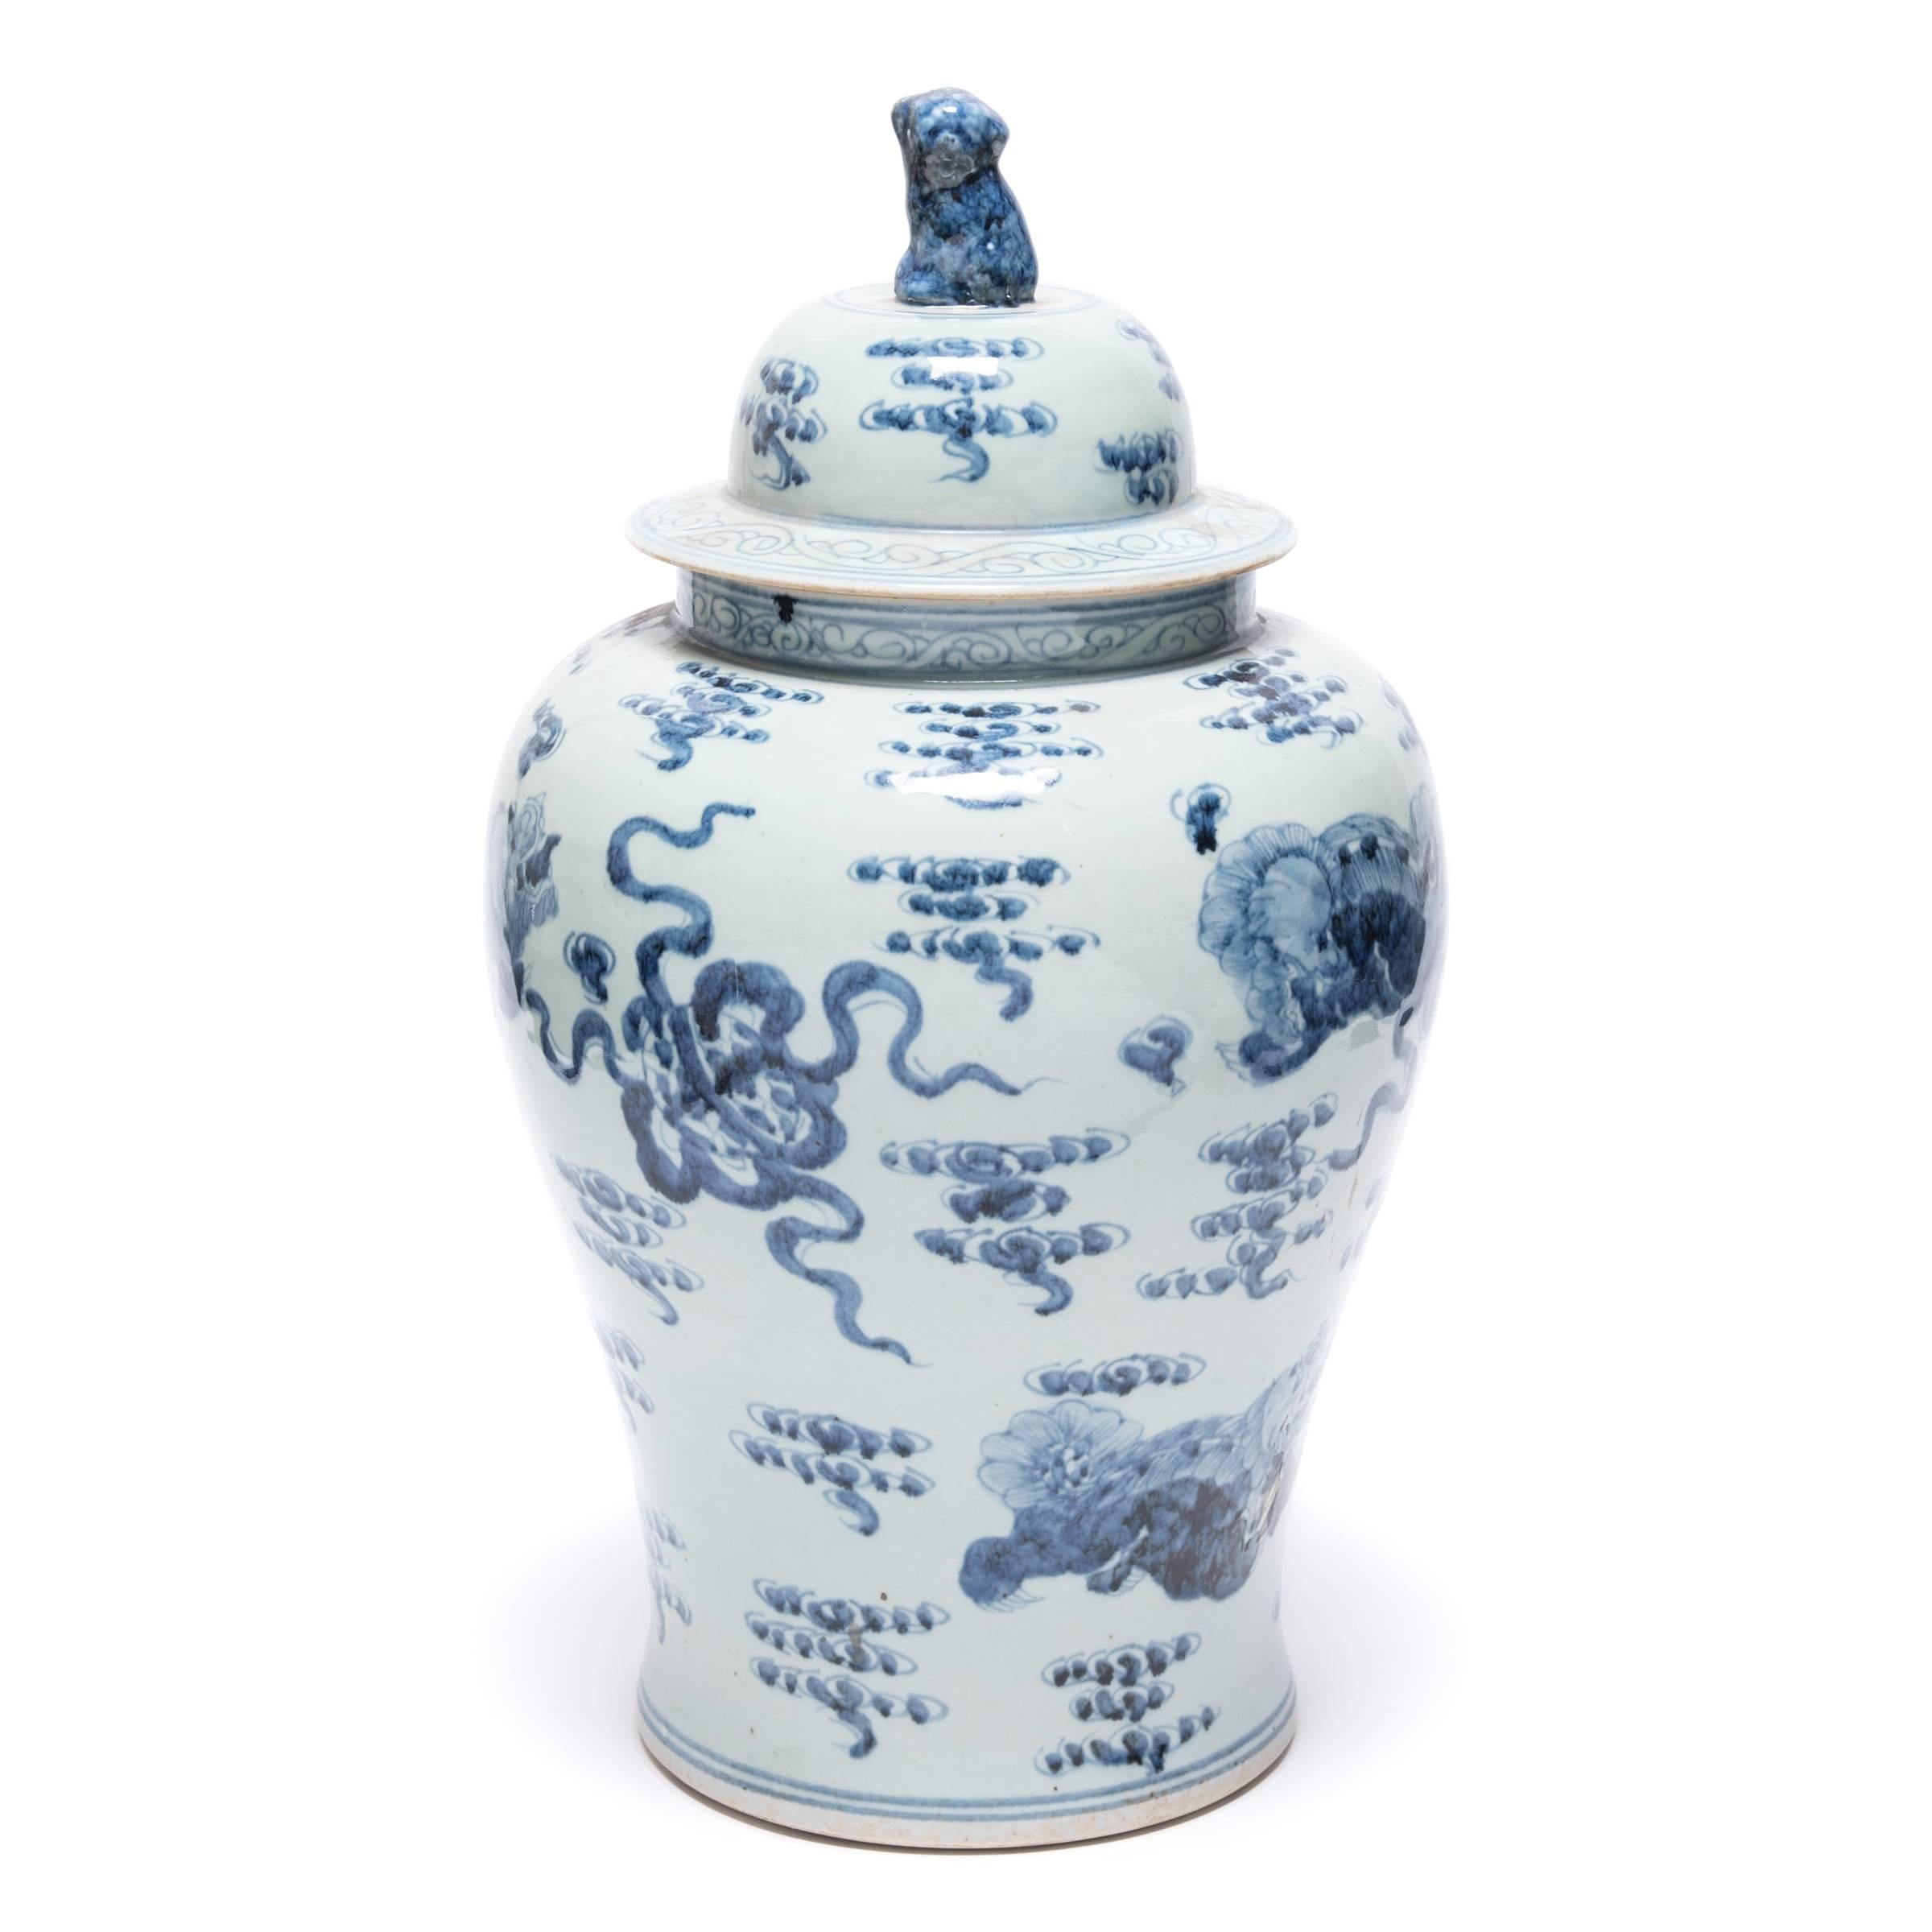 Images of shizi, a lion-dog symbol of power and strength of character, cavort among the stylized clouds of heaven on this hand-painted covered jar. Originally intended for storing spices, this jar is a beautiful example of traditional Chinese